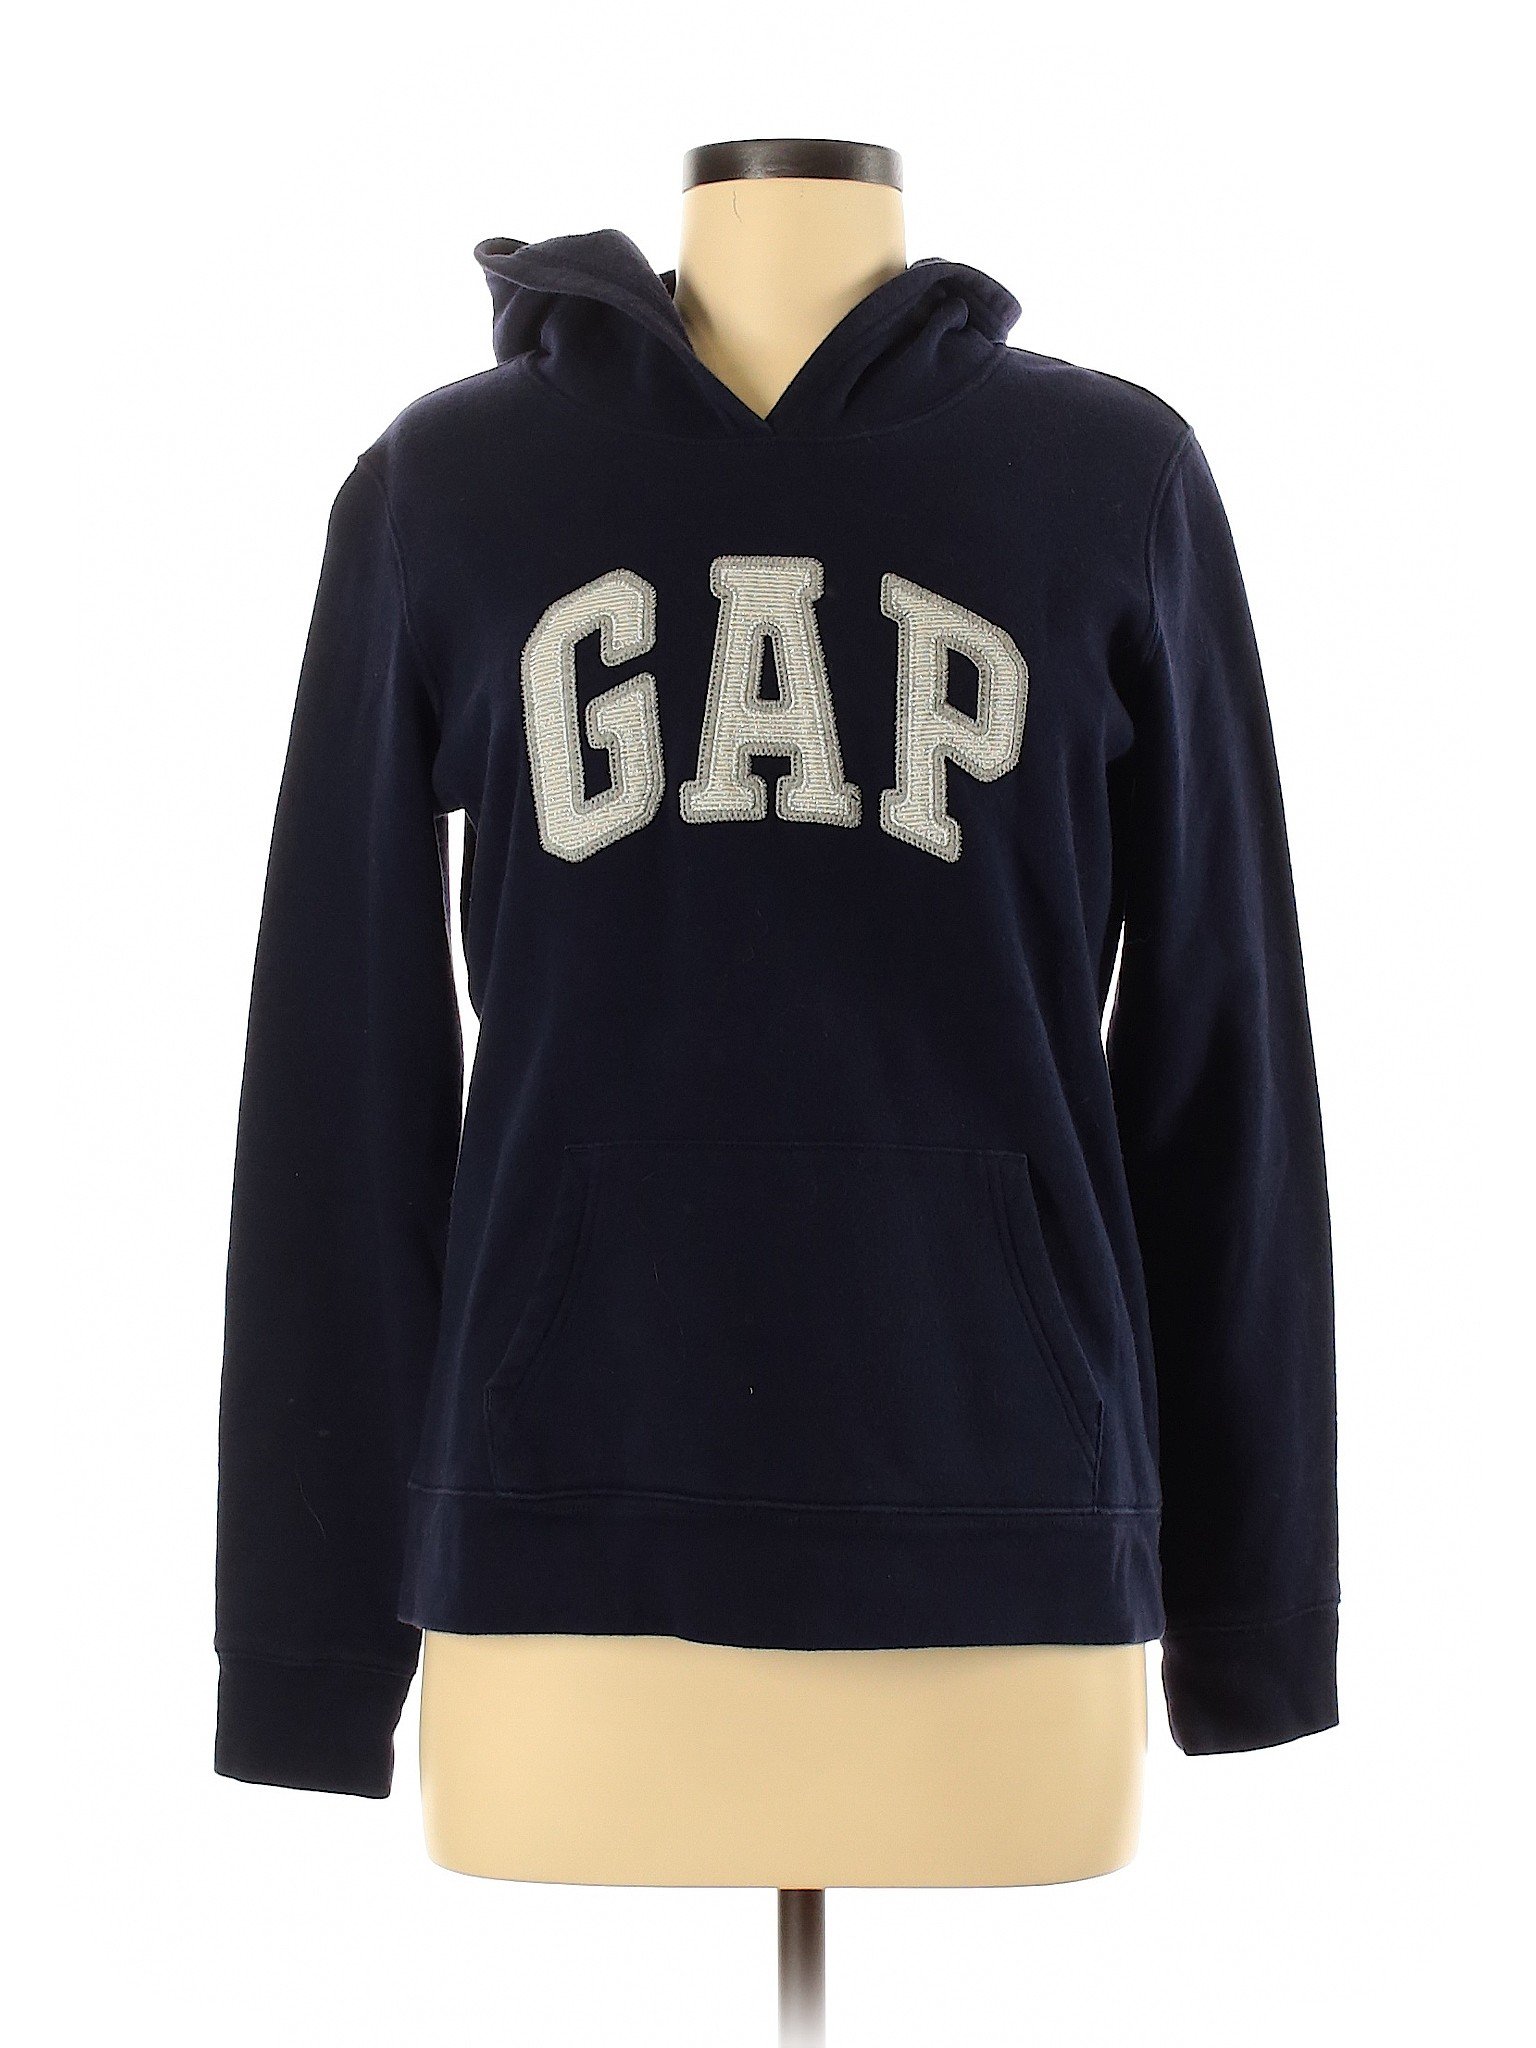 Gap Outlet Blue Pullover Hoodie Size M 55% off thredUP